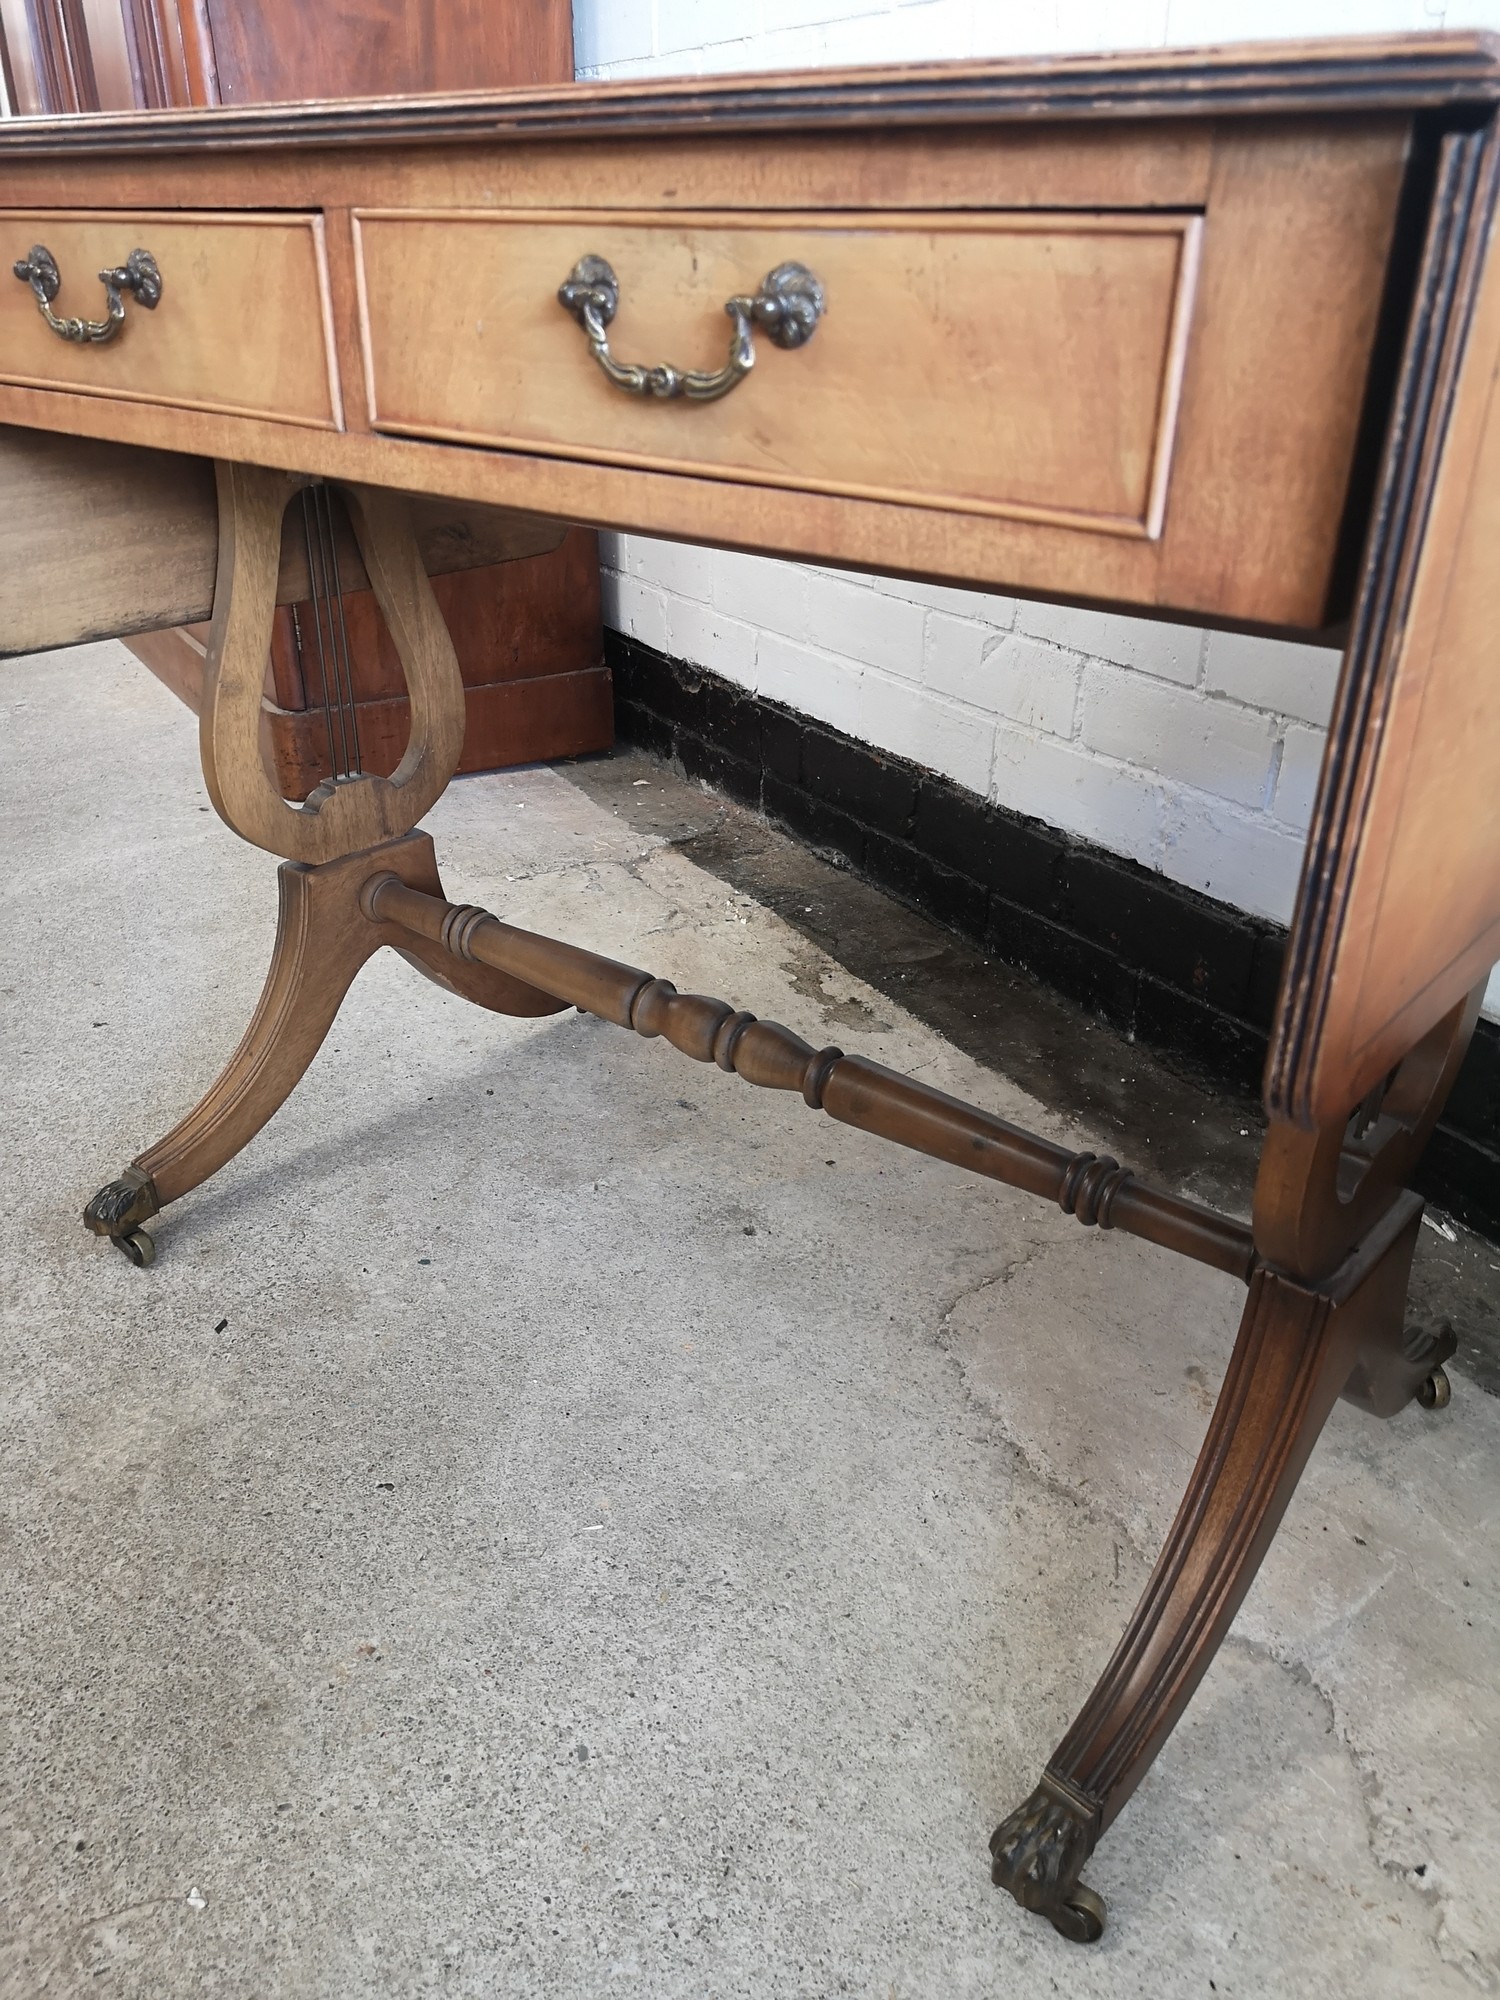 Reproduction drop leaf liar end table with 2 drawers. 5ft extended out with leafs in length. - Image 5 of 7